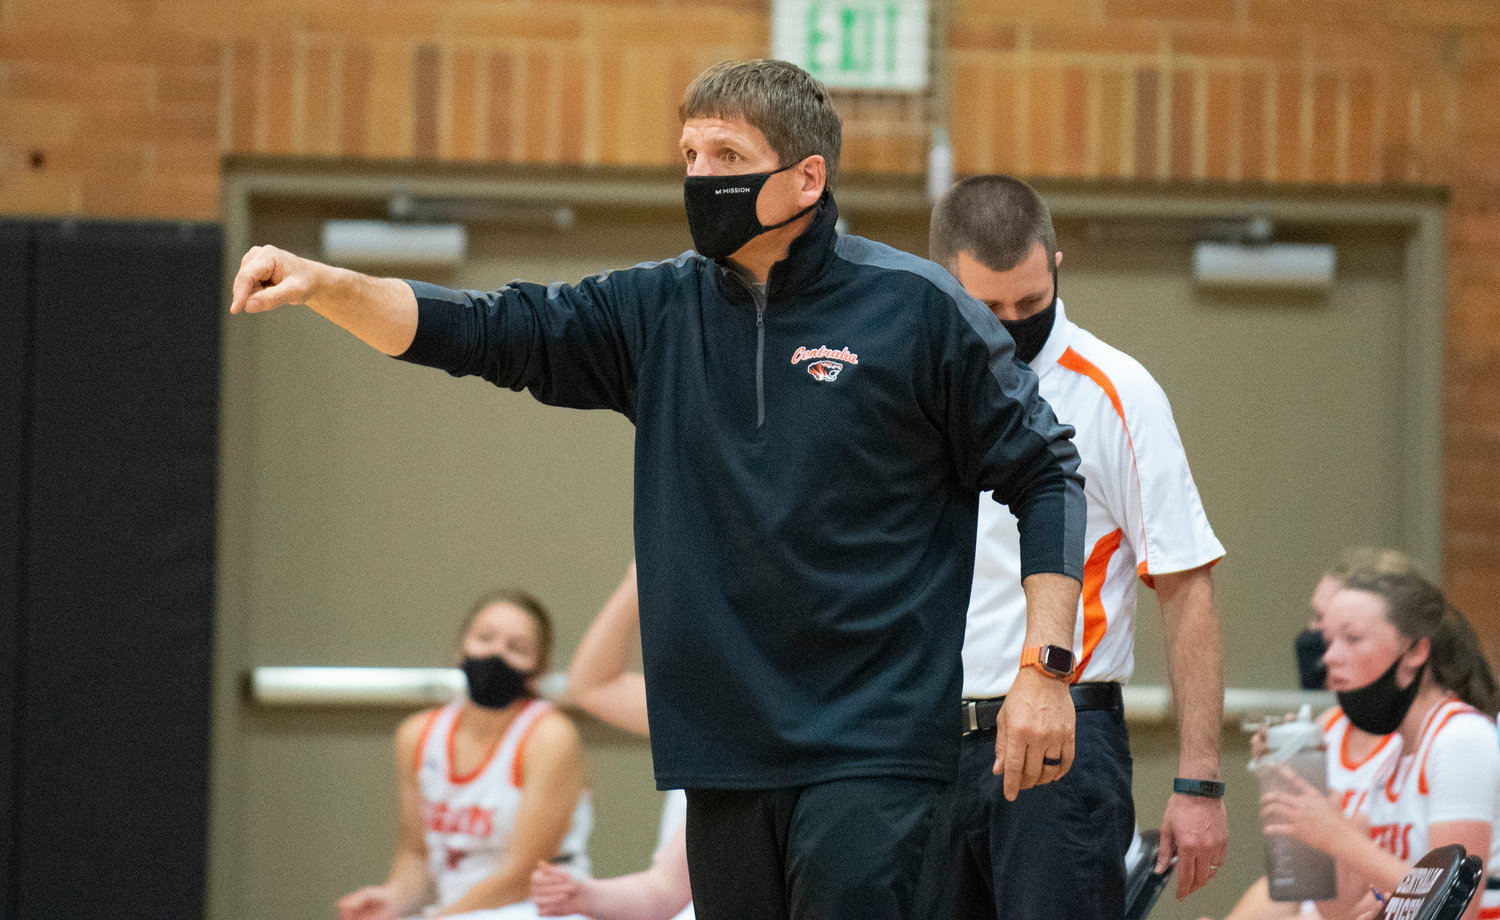 Centralia coach Doug Ashmore calls out instructions to his team during a home game against Tumwater on May 28, 2021.